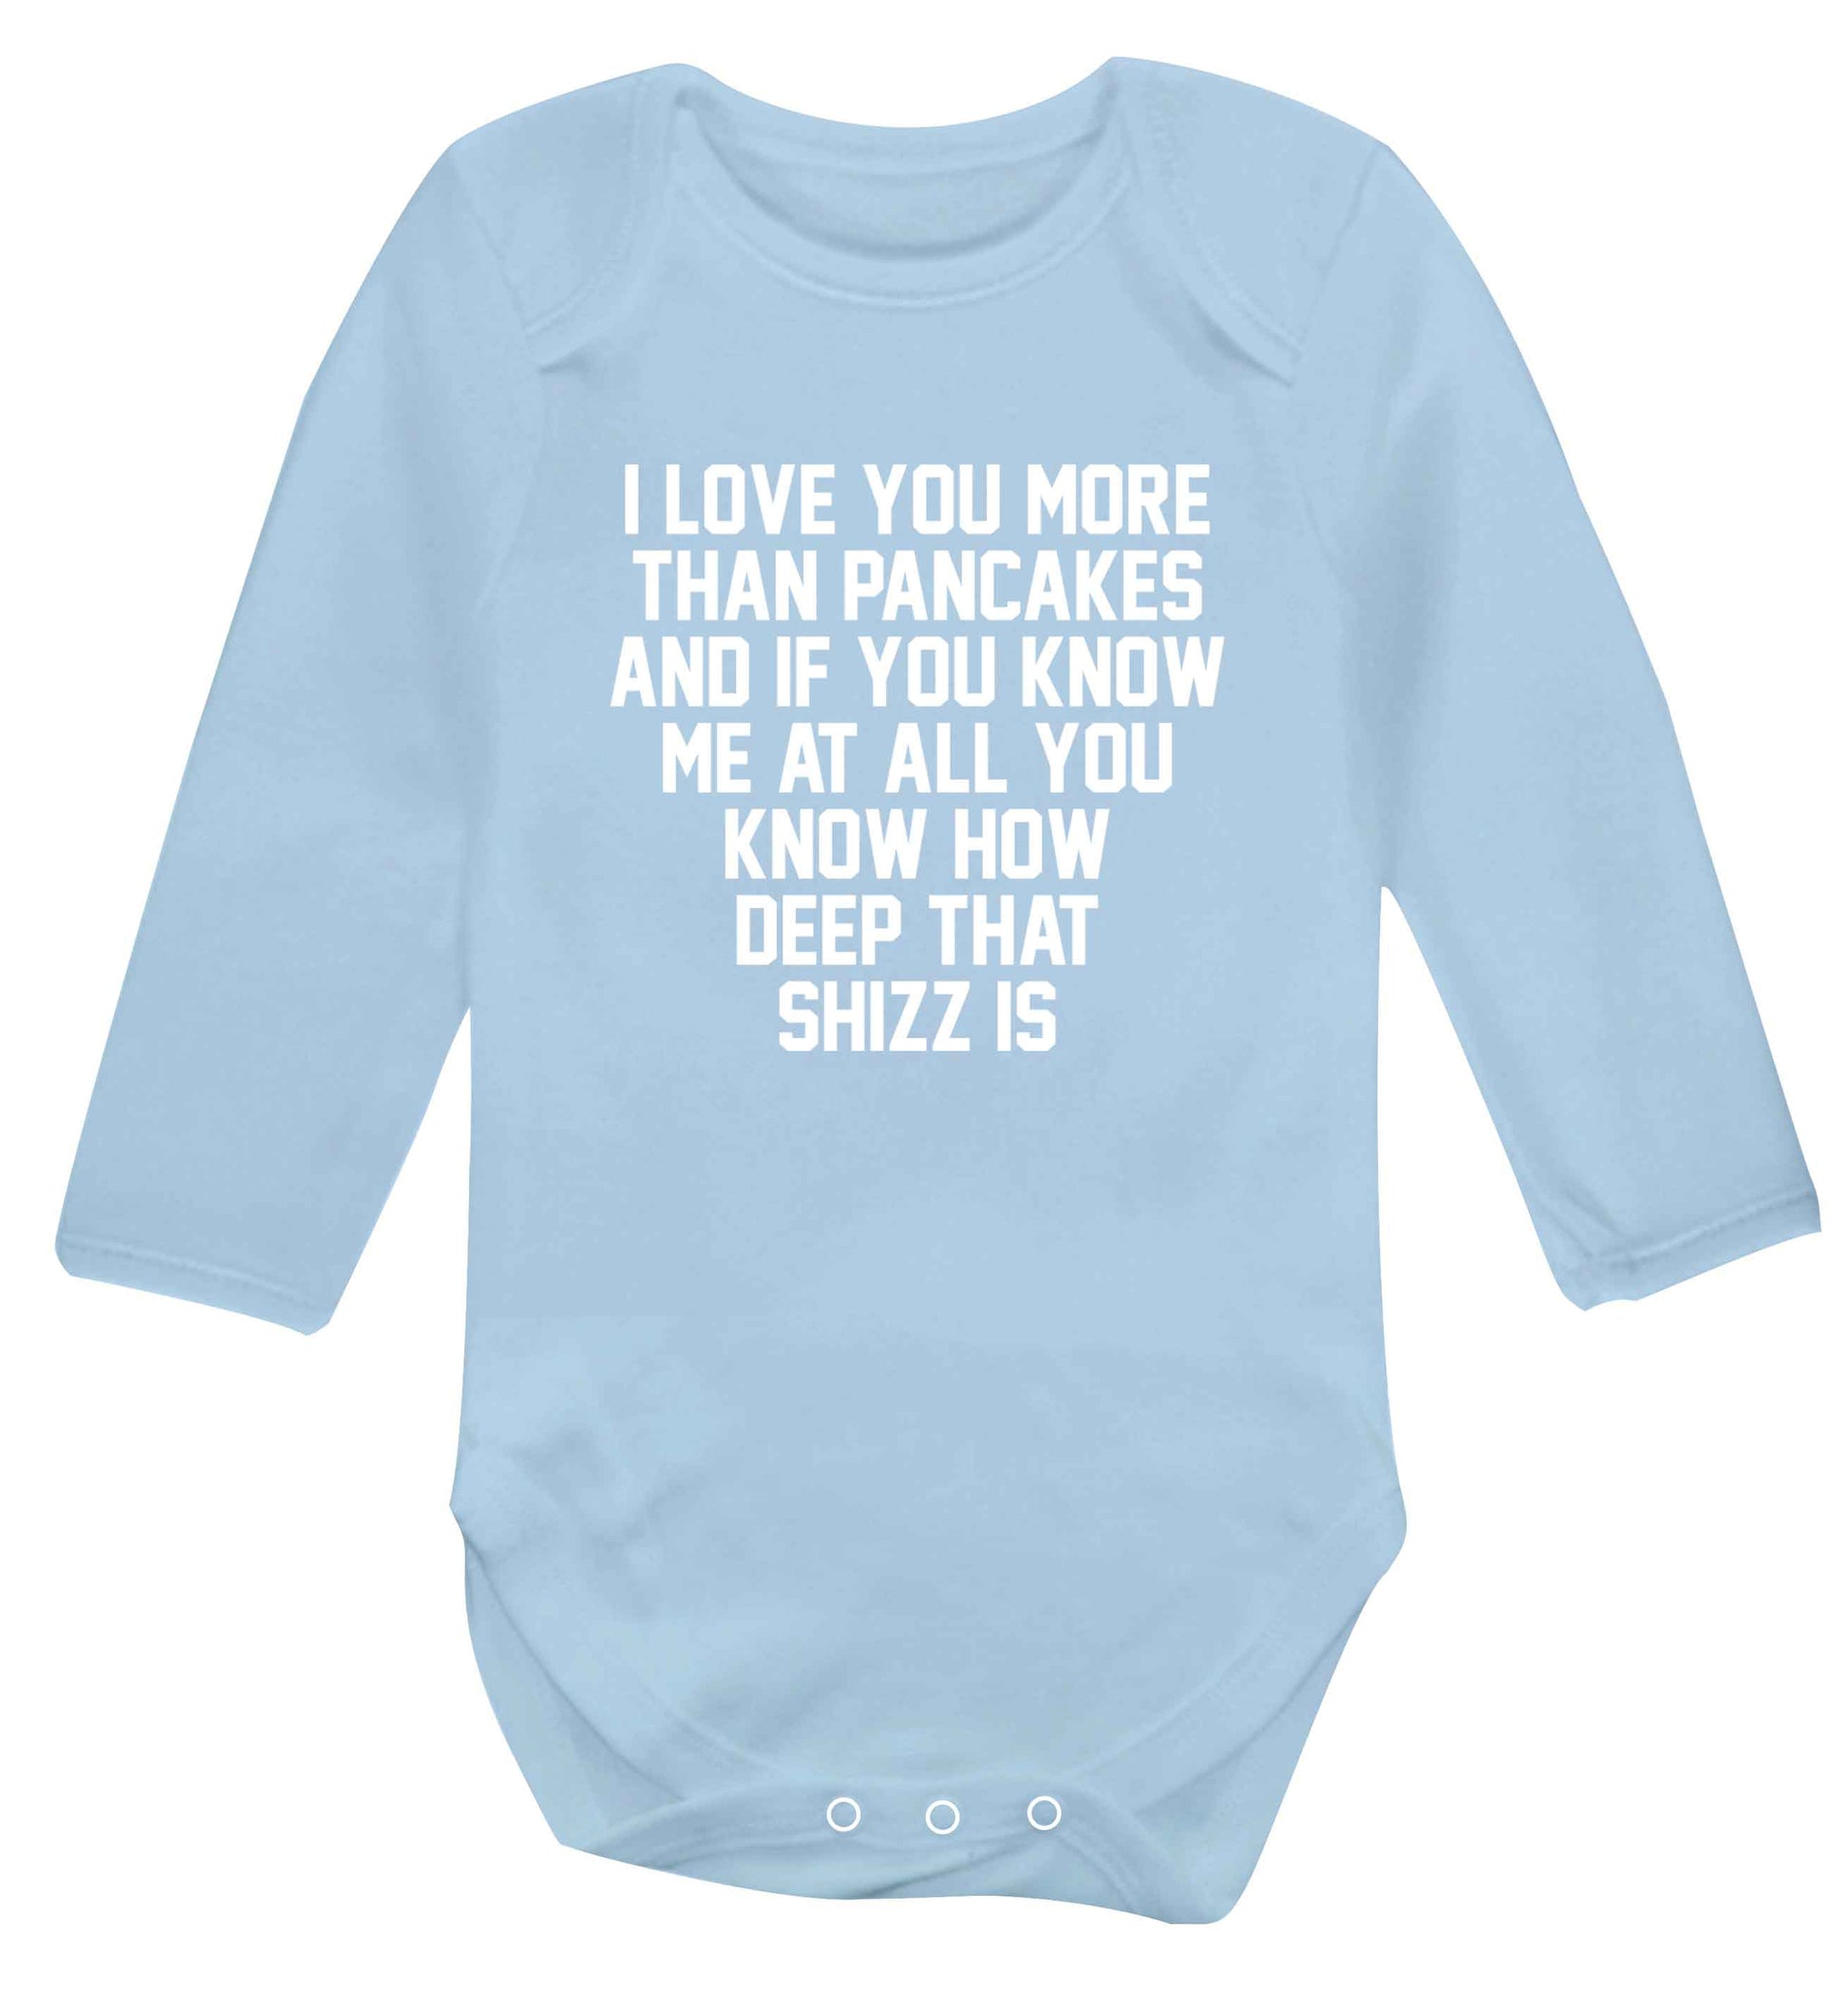 I love you more than pancakes and if you know me at all you know how deep that shizz is baby vest long sleeved pale blue 6-12 months